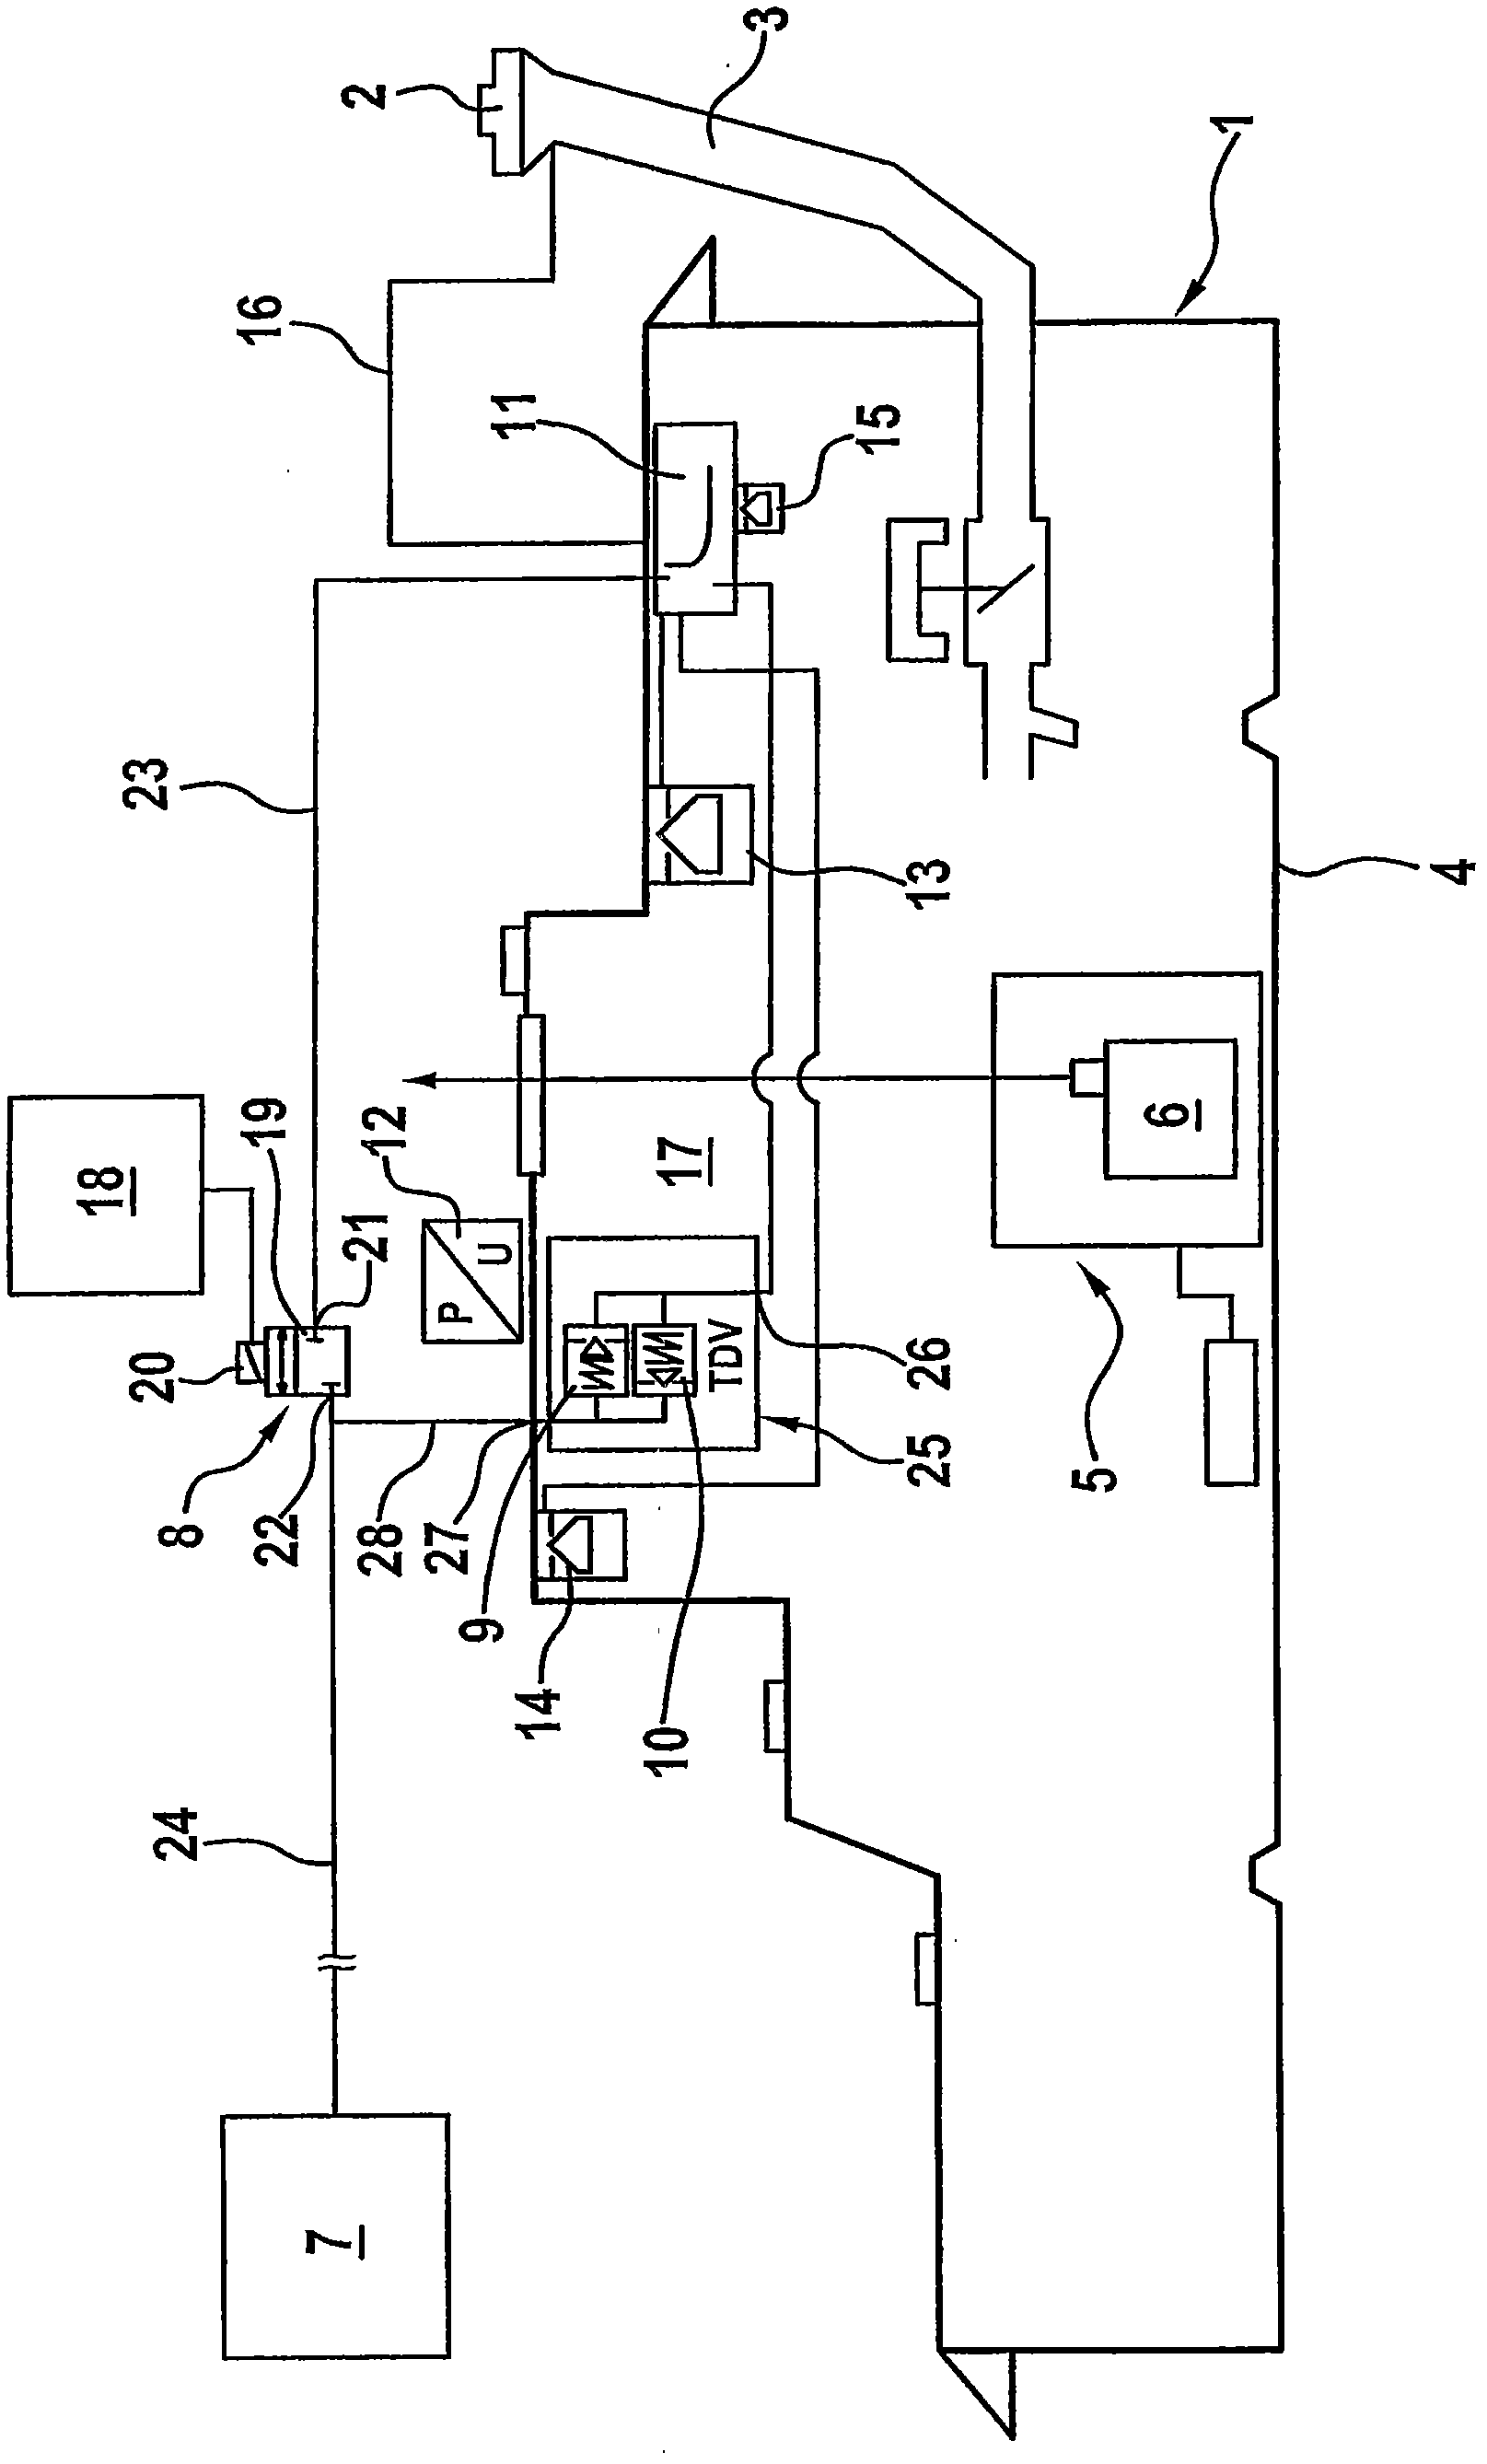 Method and device for controlling the pressure inside a fuel tank